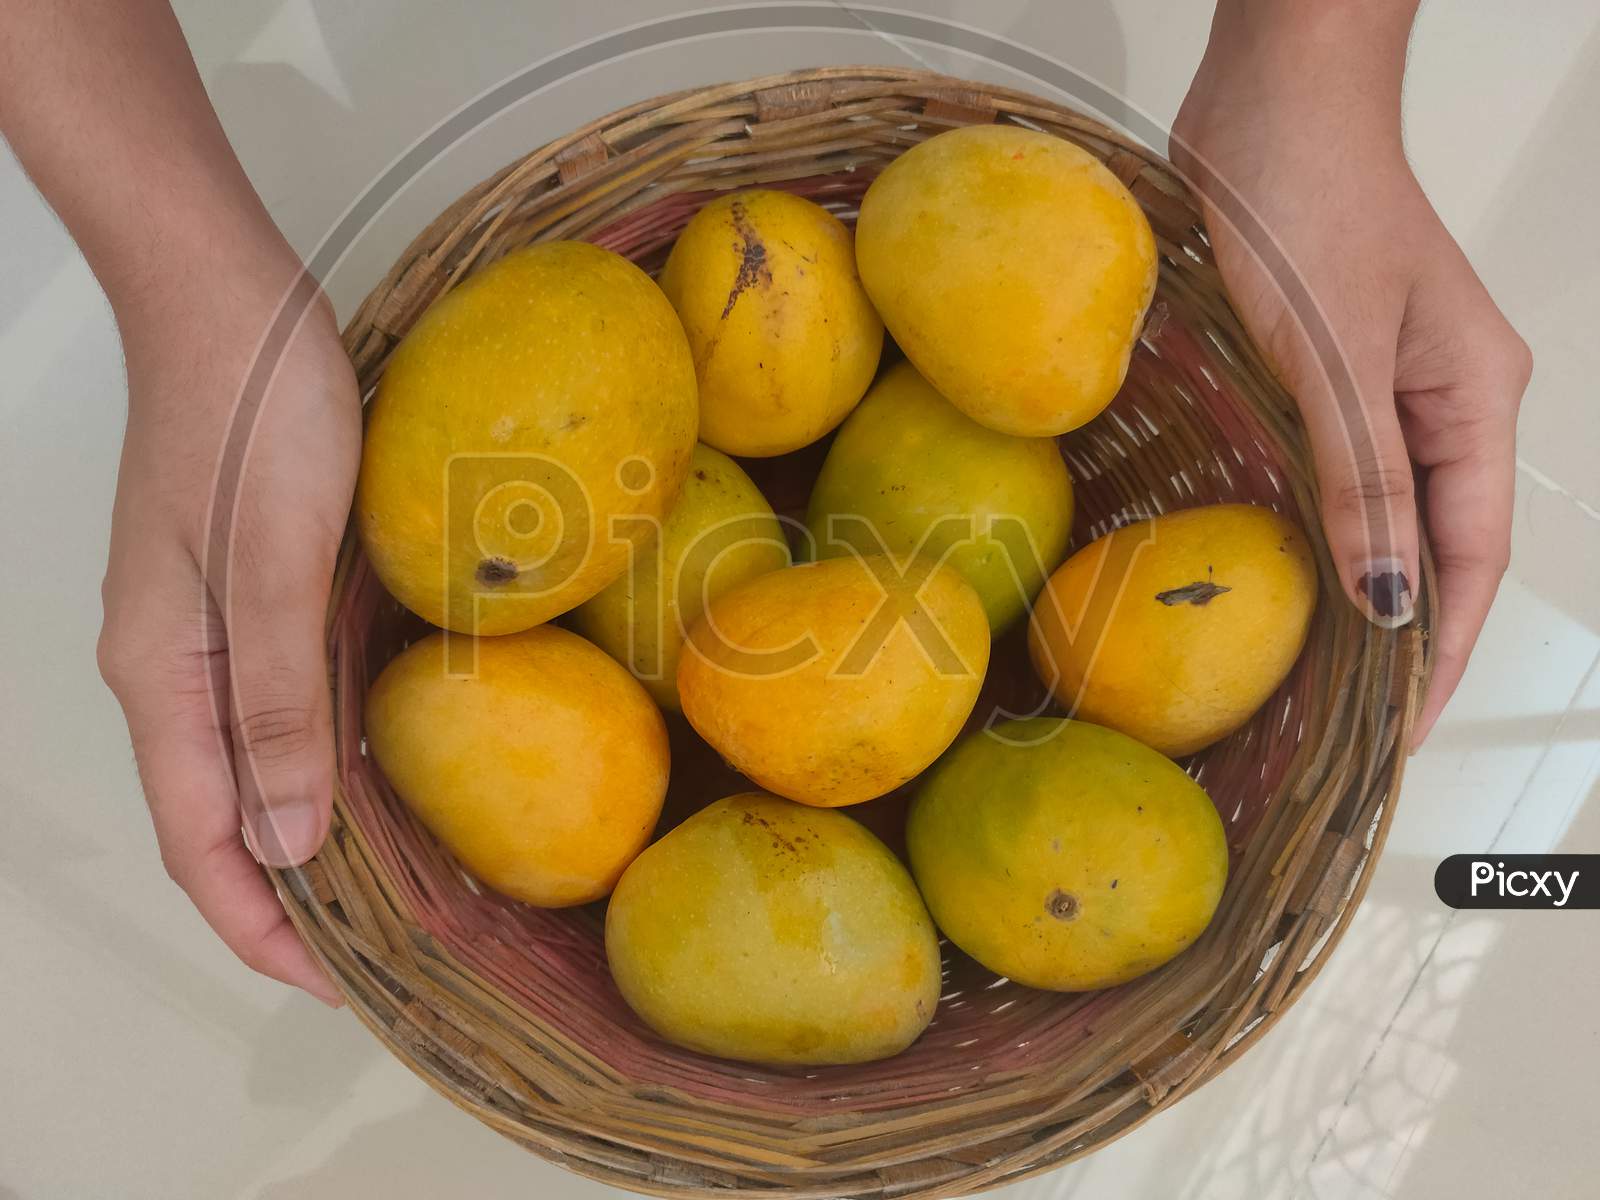 Hand Of Female Carrying Mango Fruit In Wooden Basket Putting On Ceramic Floor Tile Background.